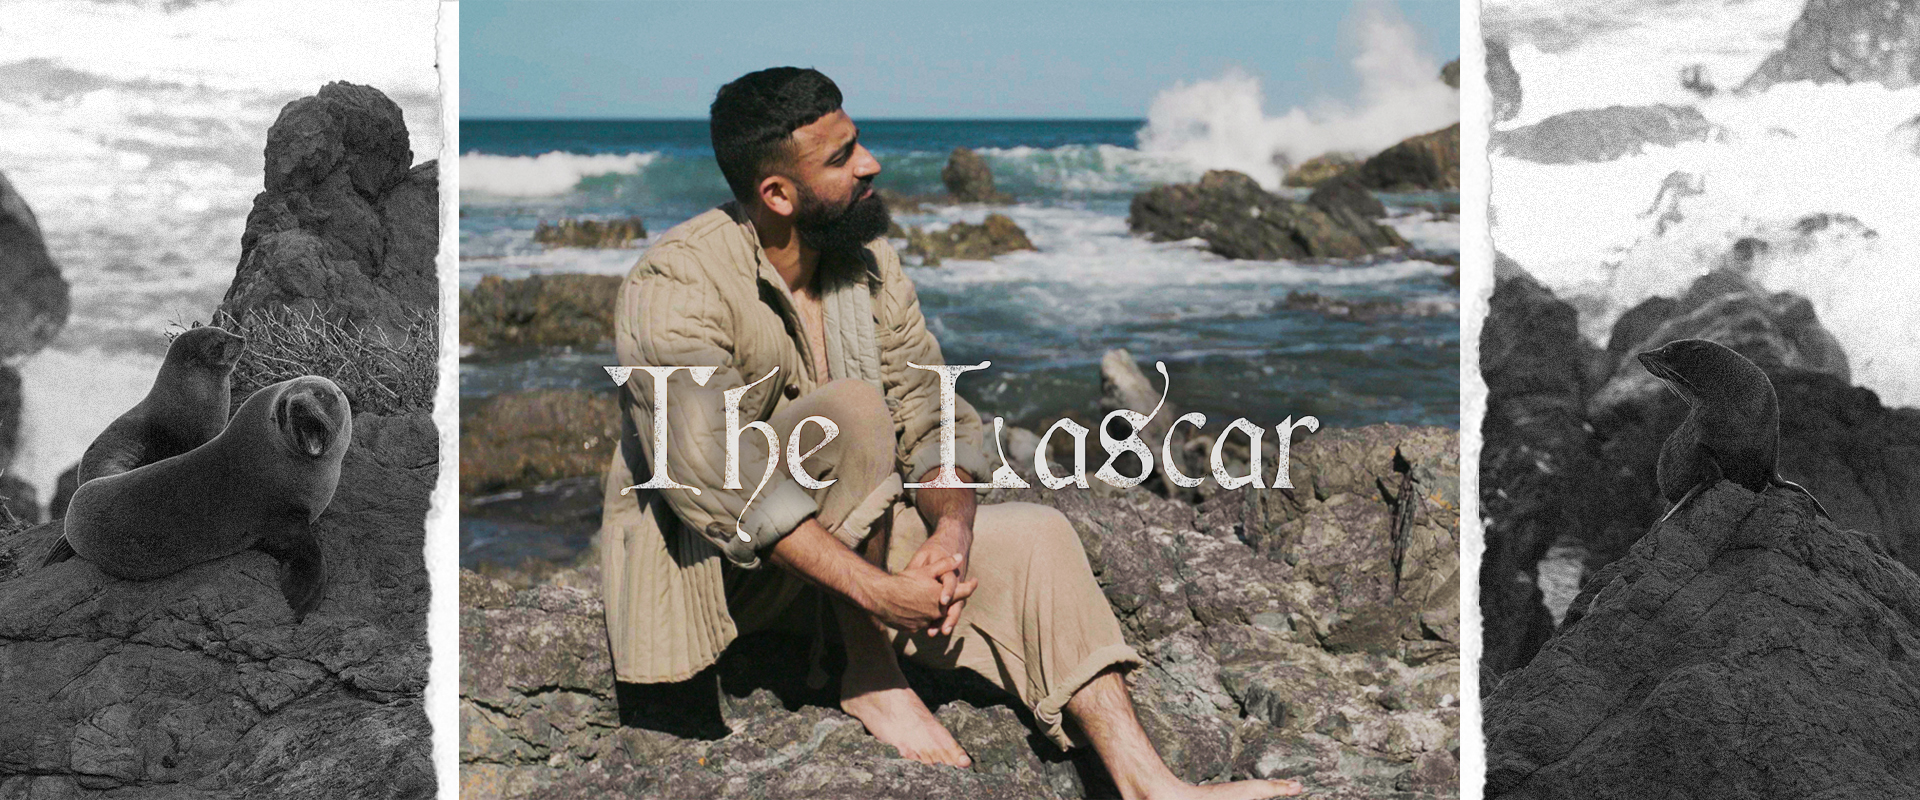 The Lascar | Boosted | Crowdfunding Arts in New Zealand